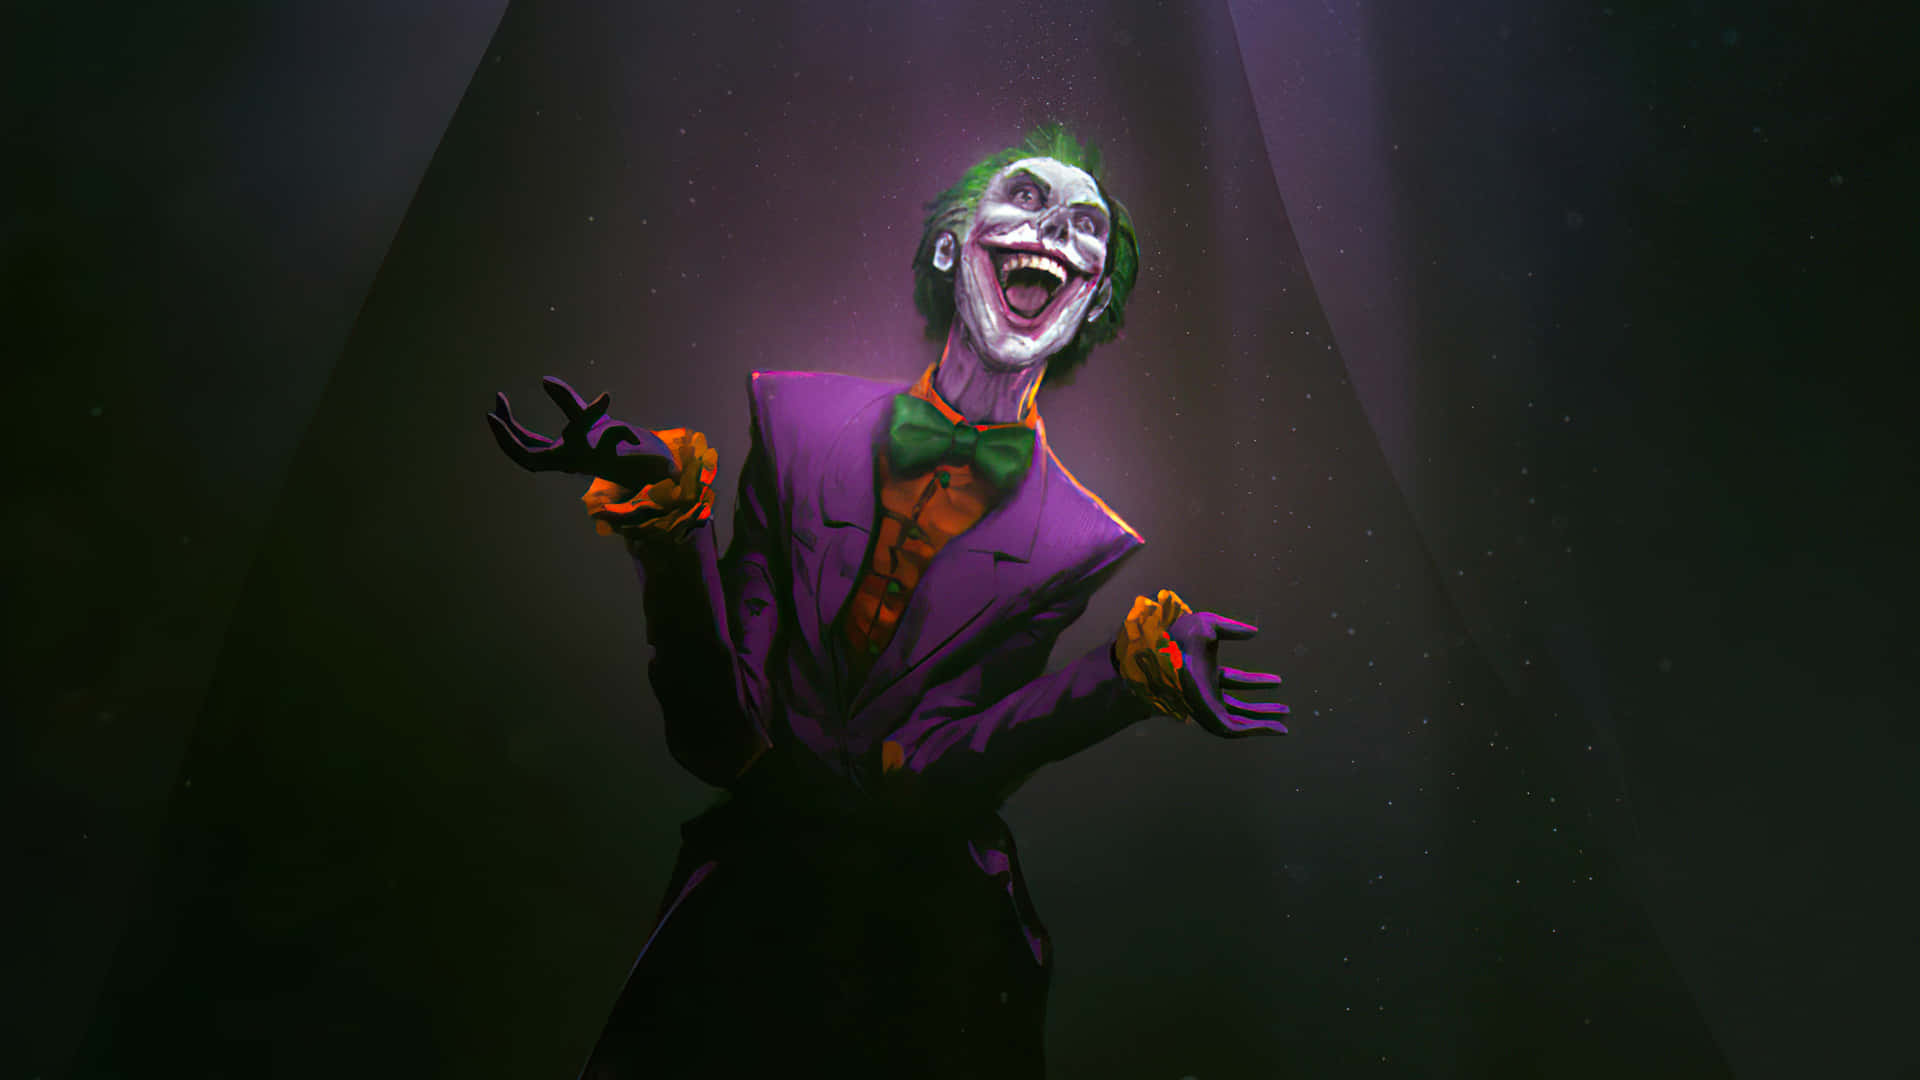 Maniacal Laugh Of The Joker Background